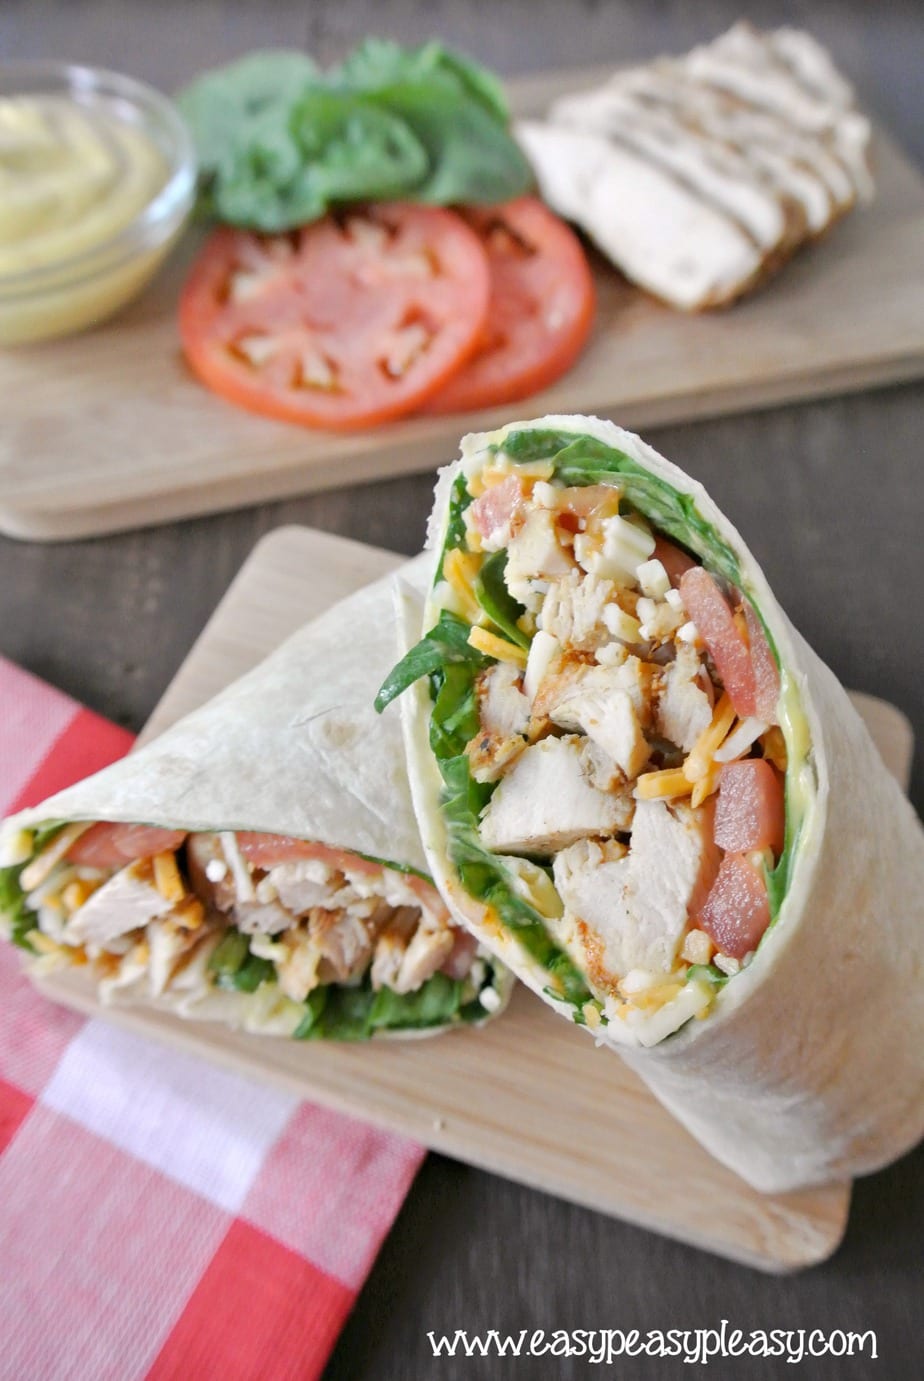 How to roll a picture perfect grilled chicken wrap every time with recipe included.